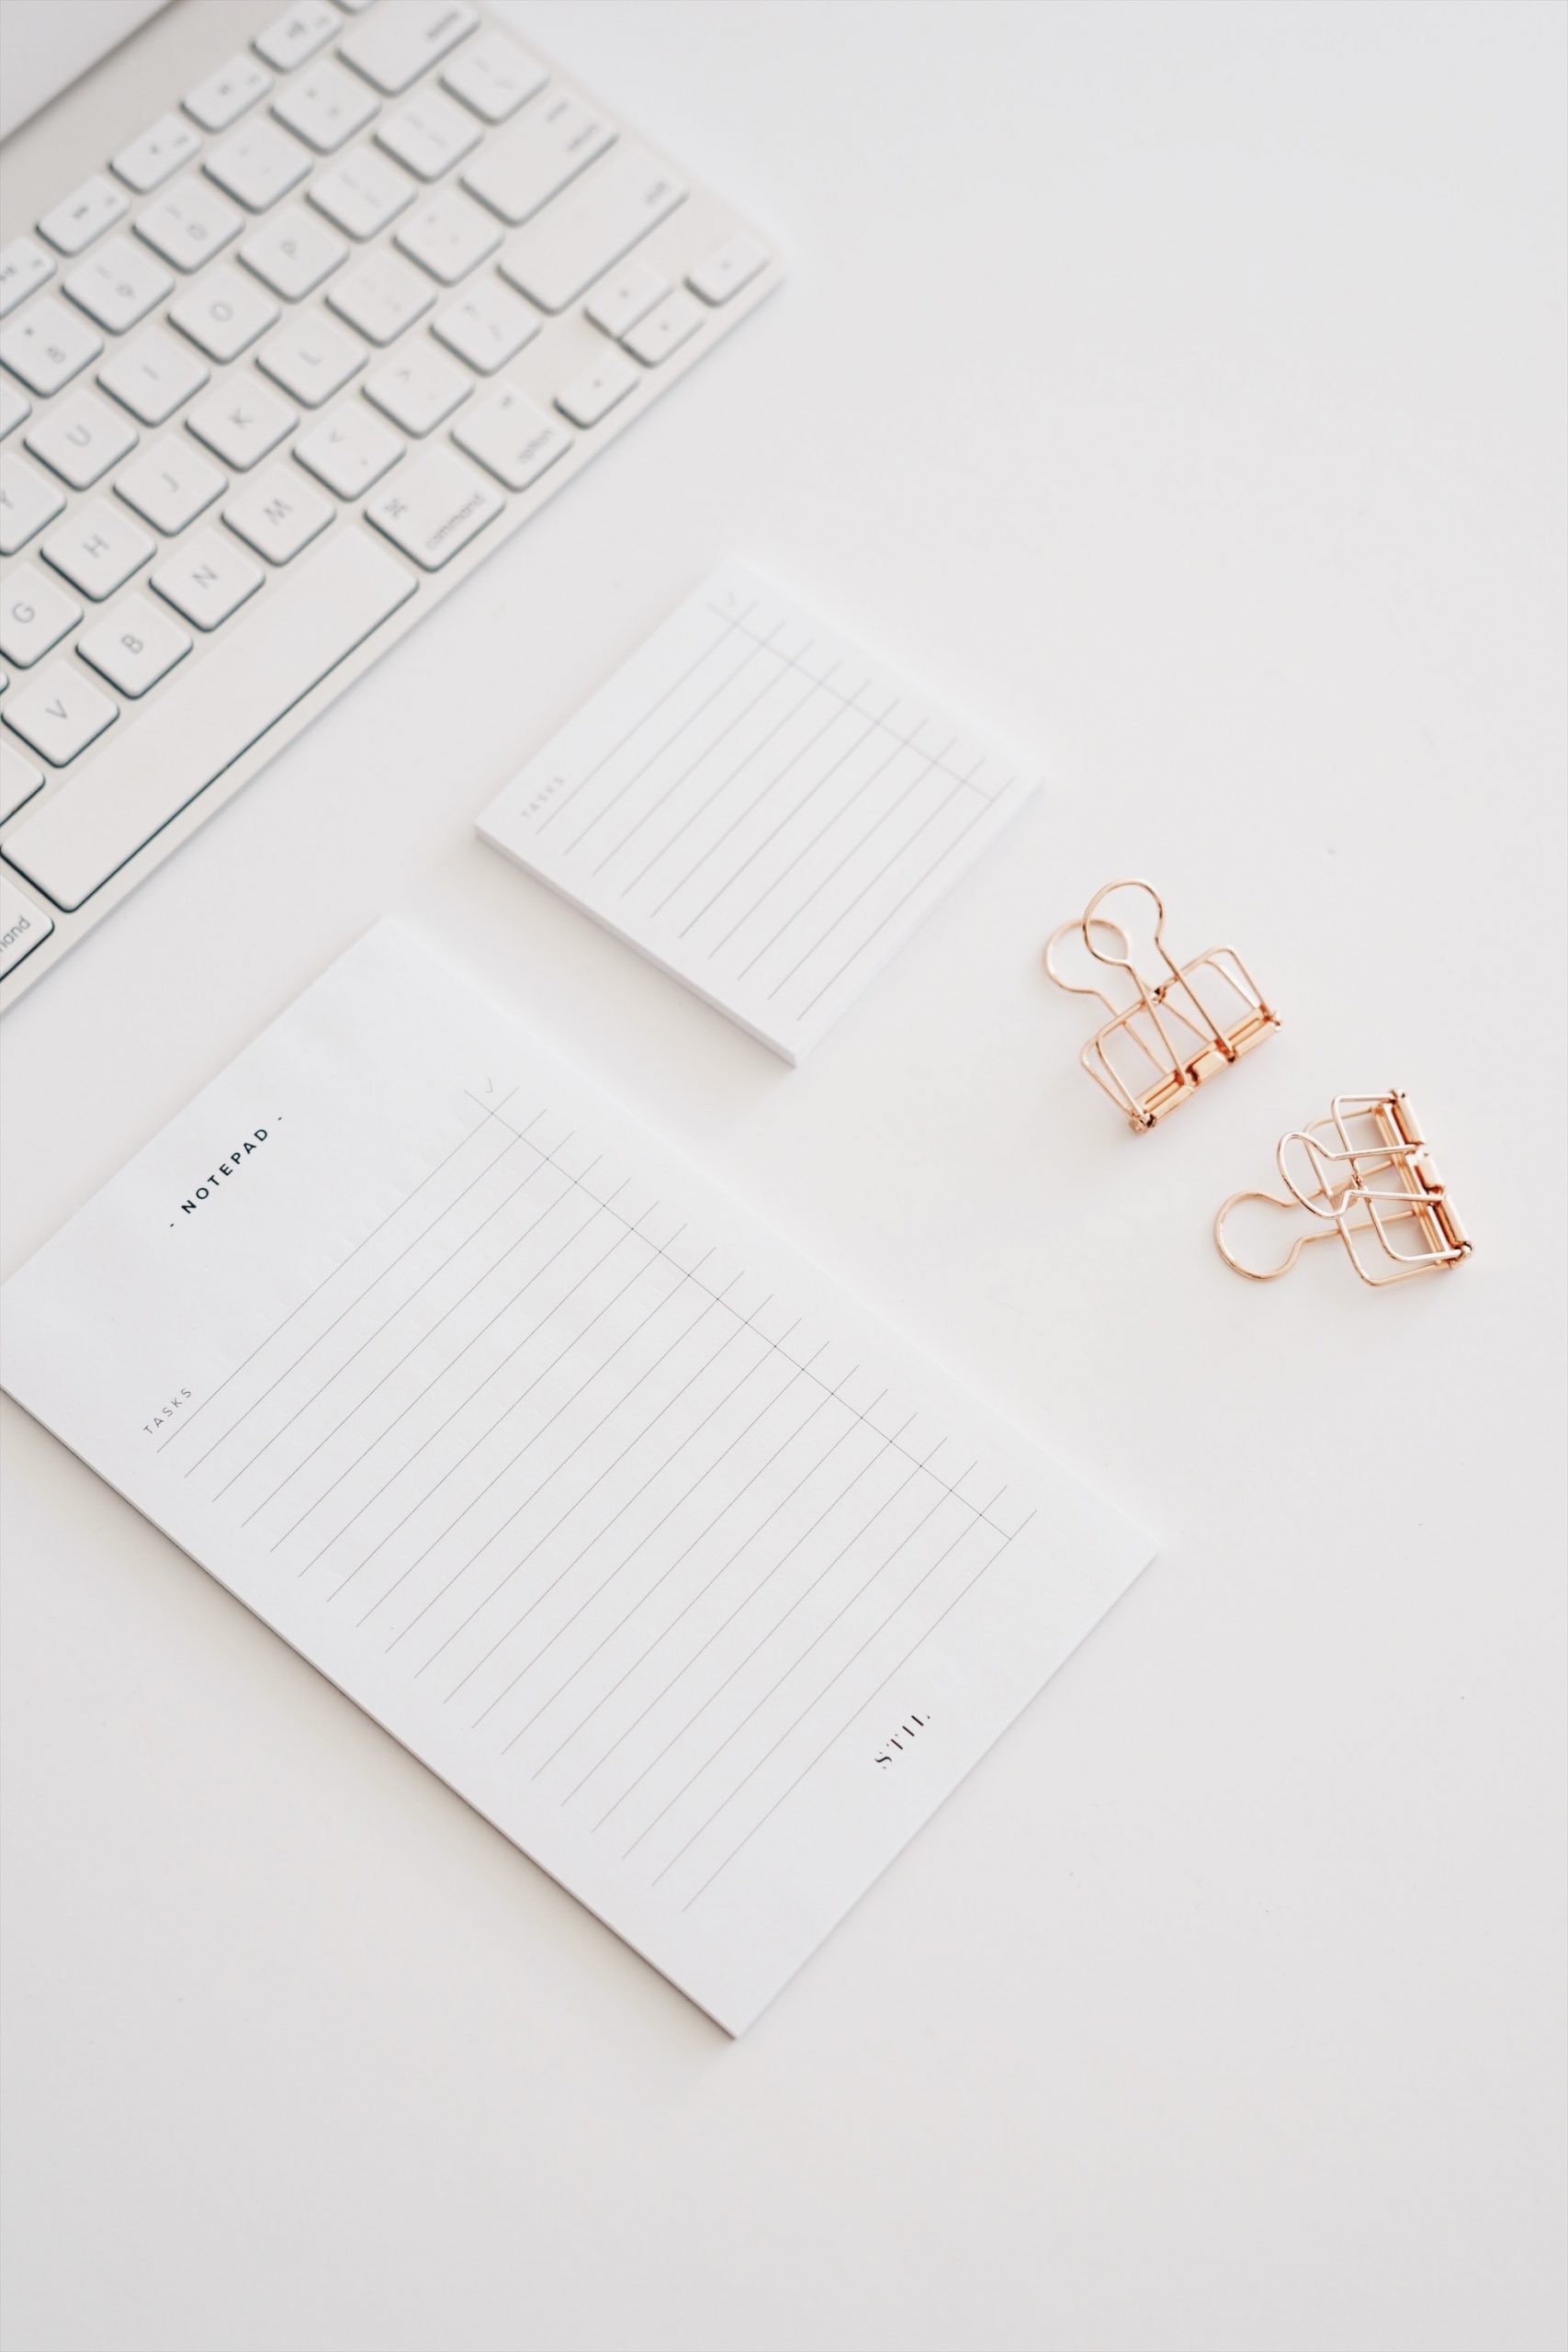 White keyboard, notebooks and copper bulldog clips